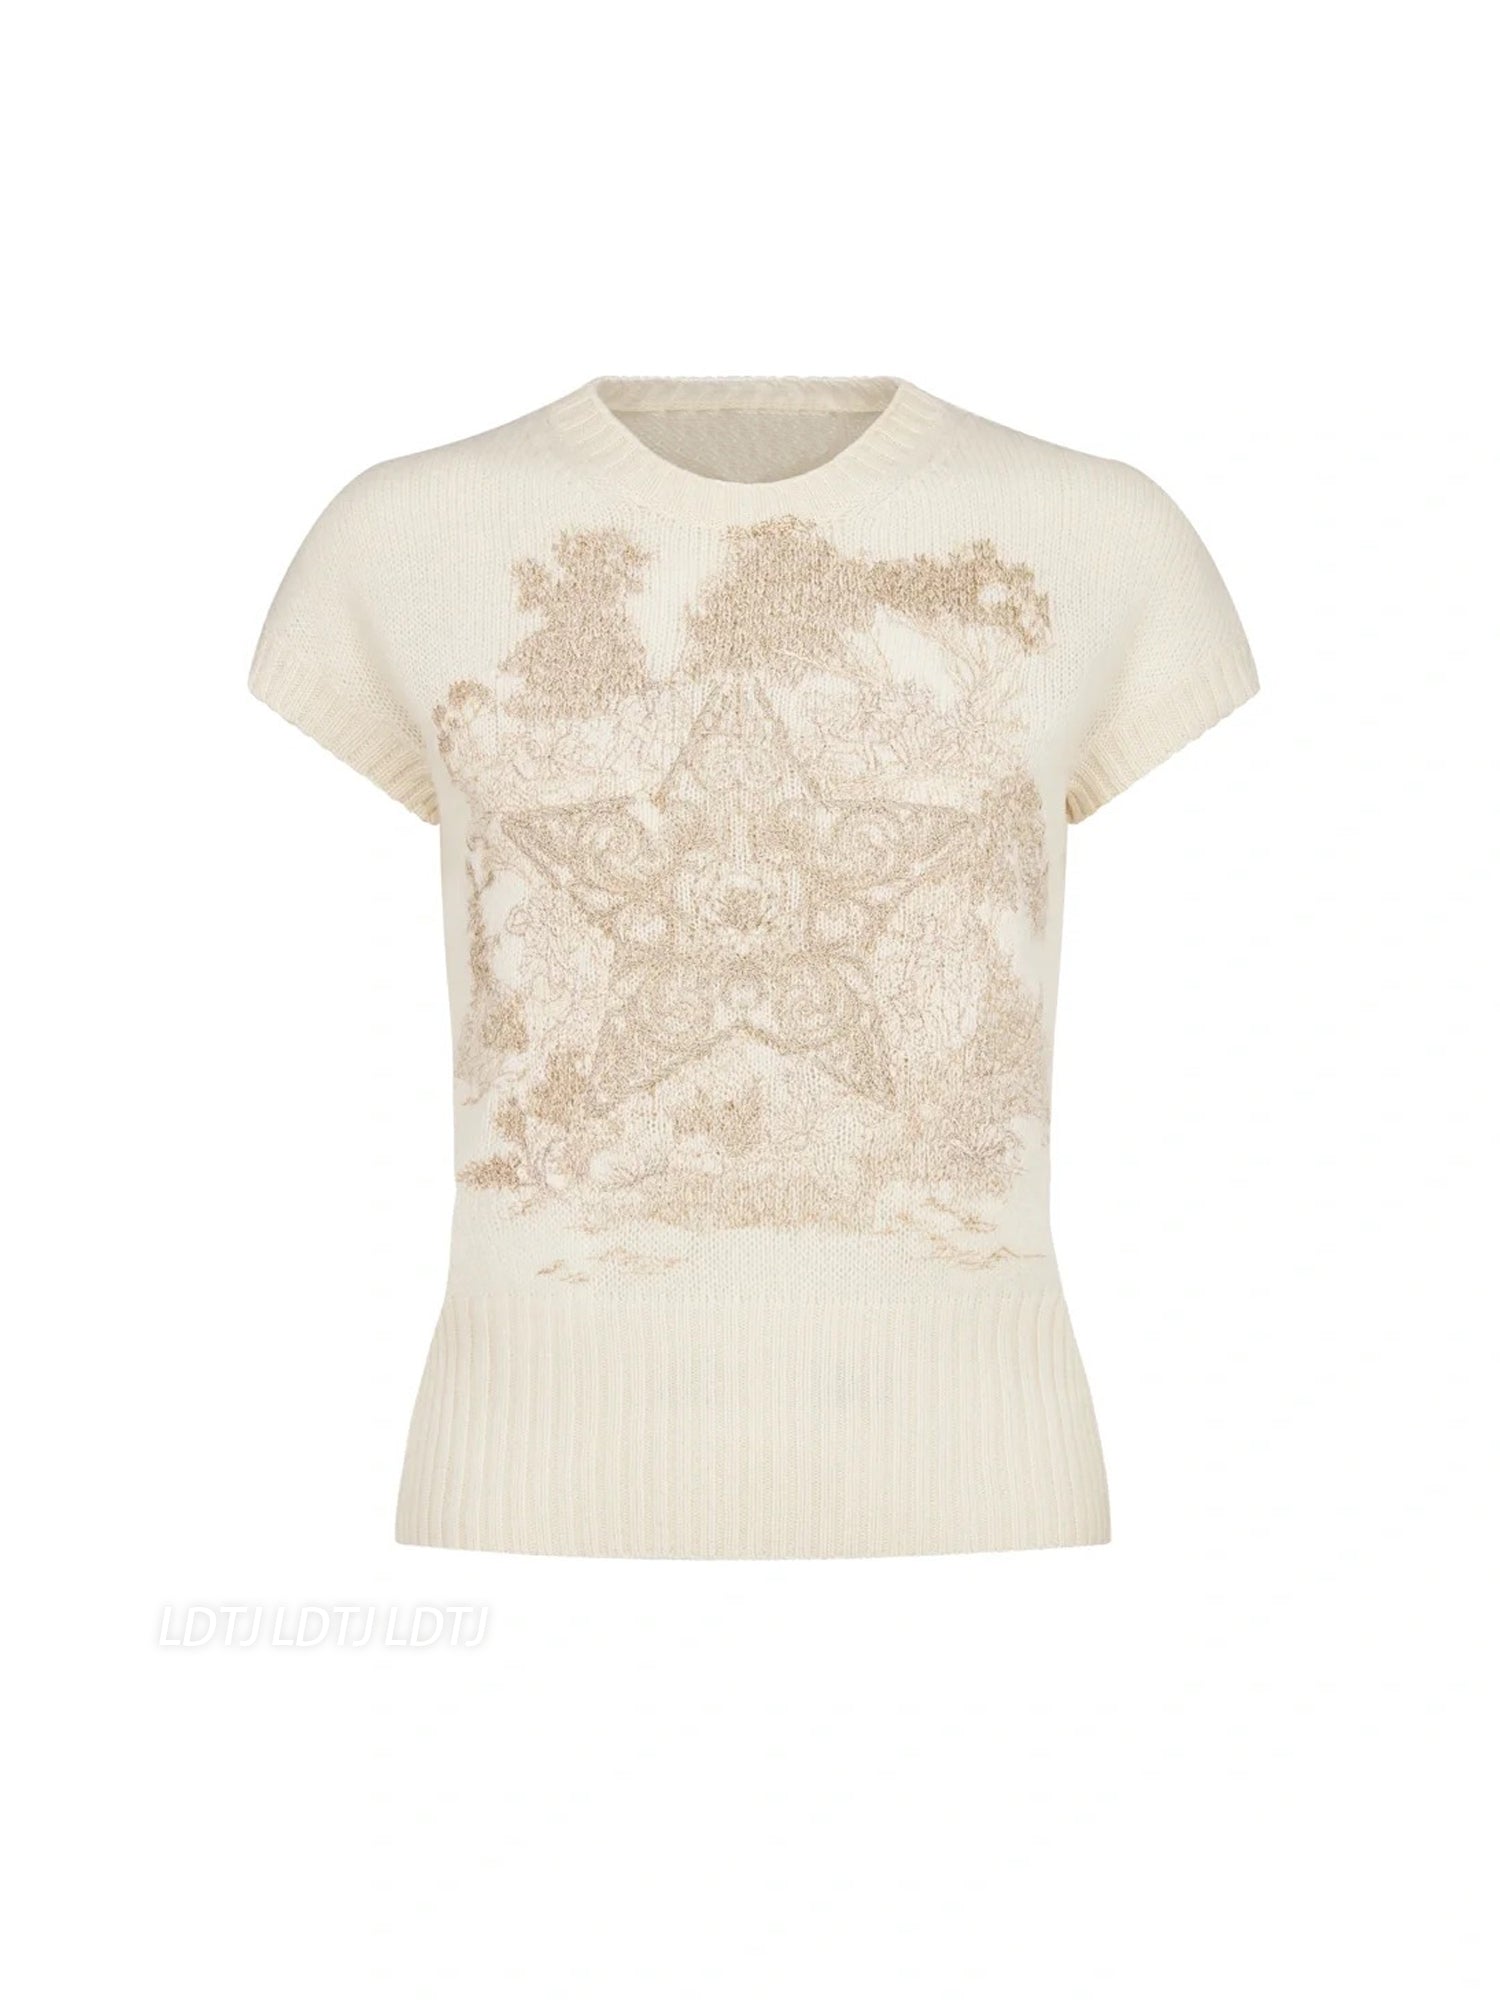 Embroidered Cashmere Top